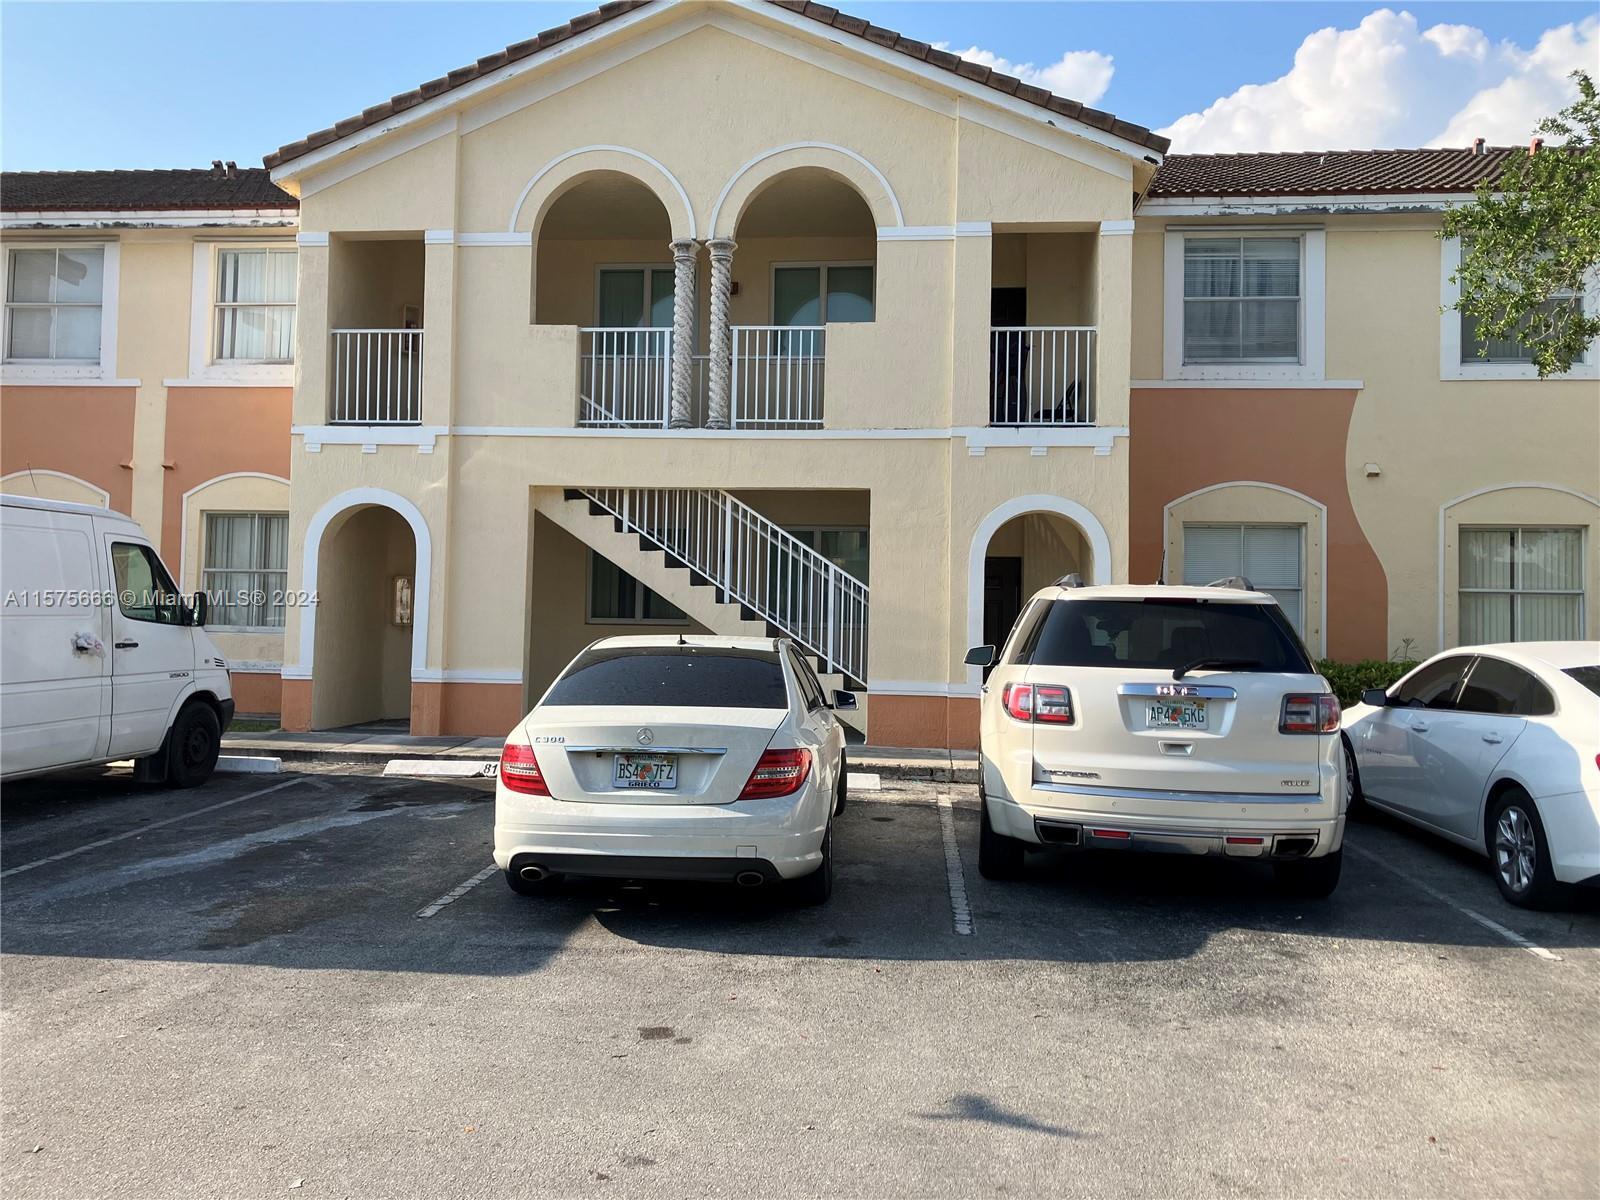 Photo of 1661 SE 28th St #107 in Homestead, FL